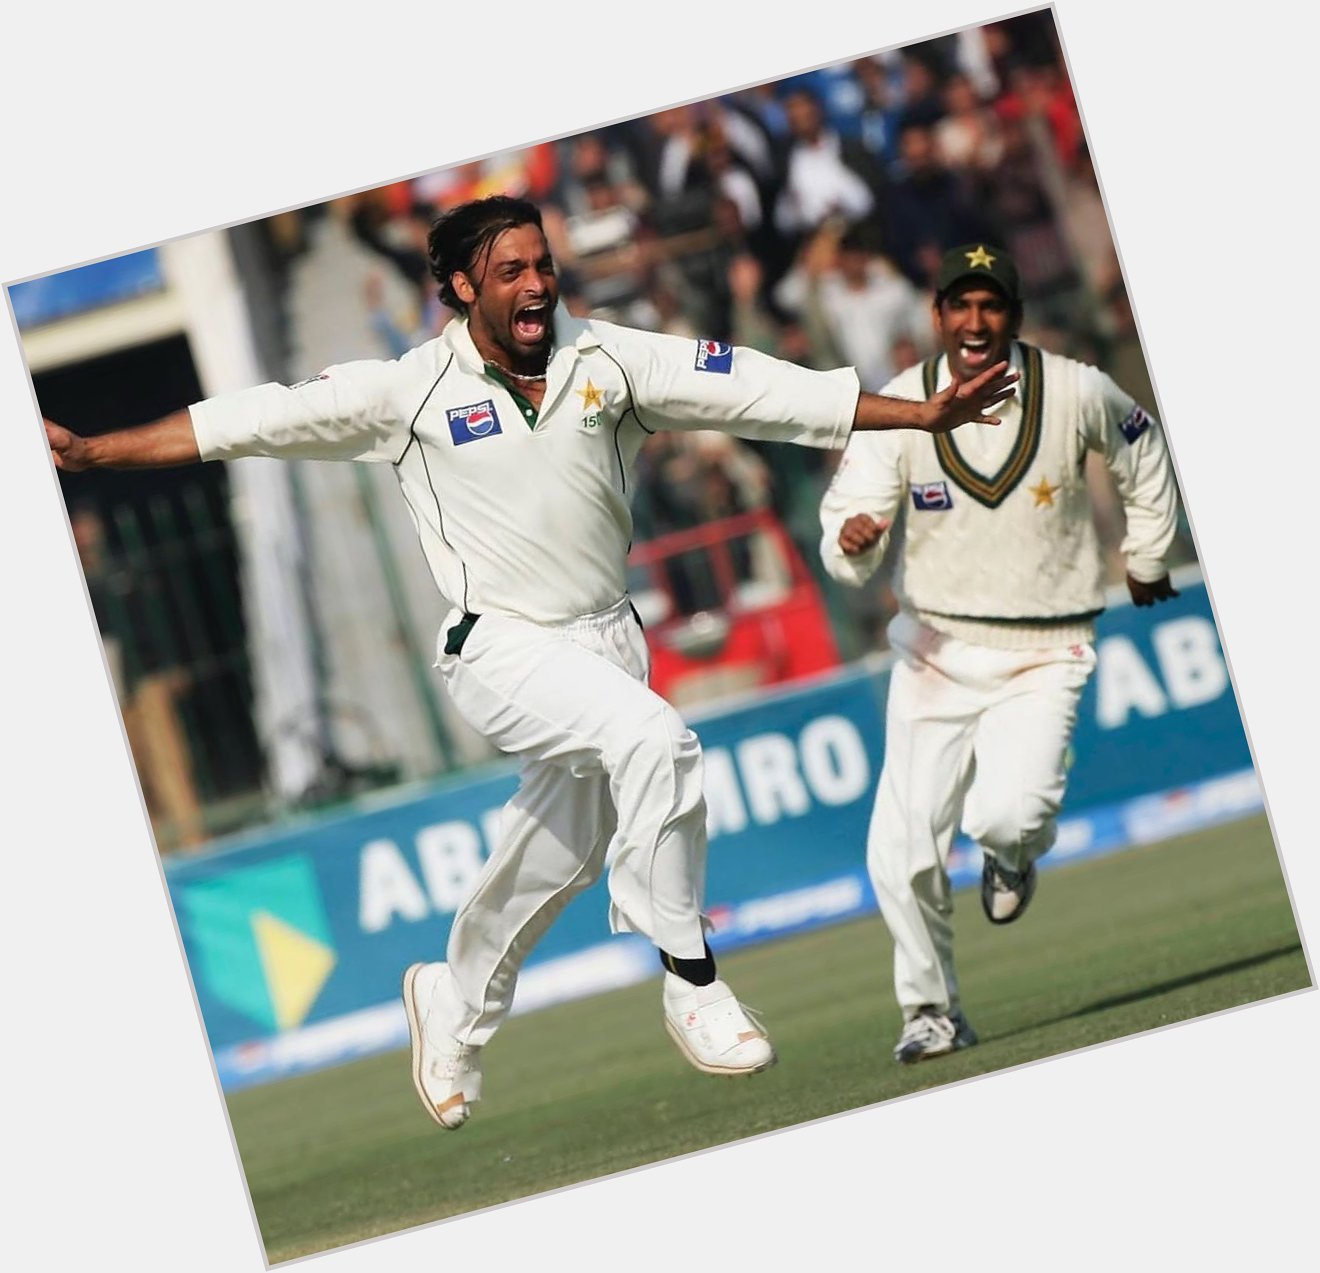 Happy Birthday To One Of The Fastest Bowlers Ever, Shoaib Akhtar  